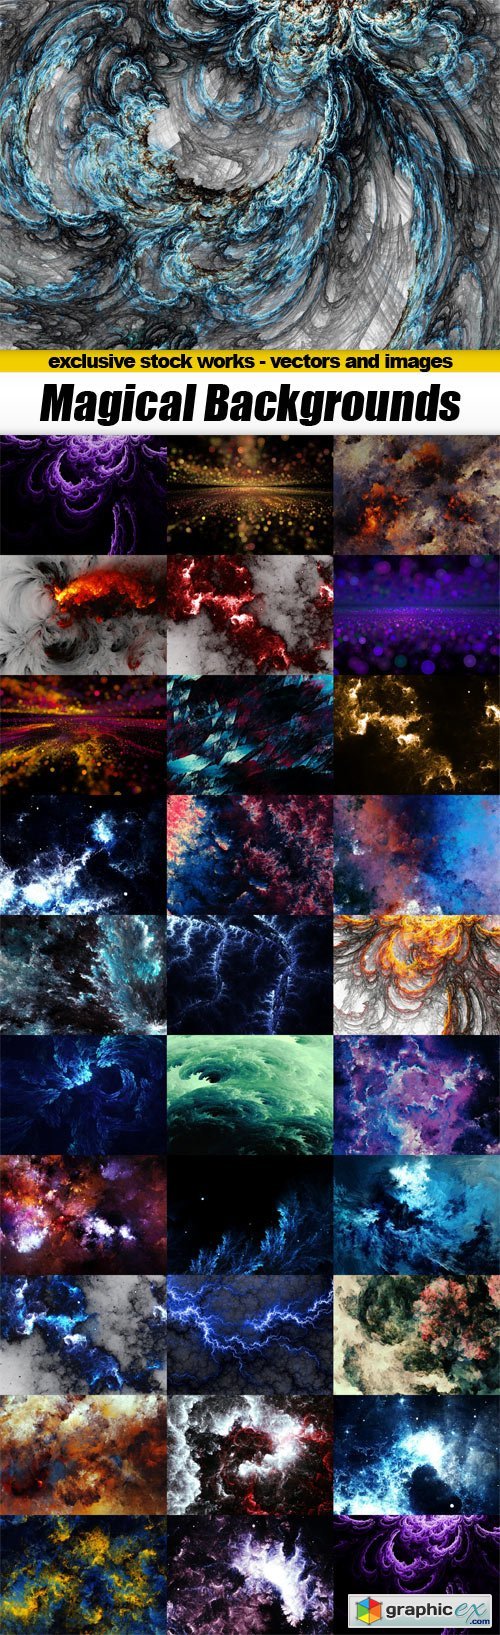 Magical Backgrounds - 30x JPEGs